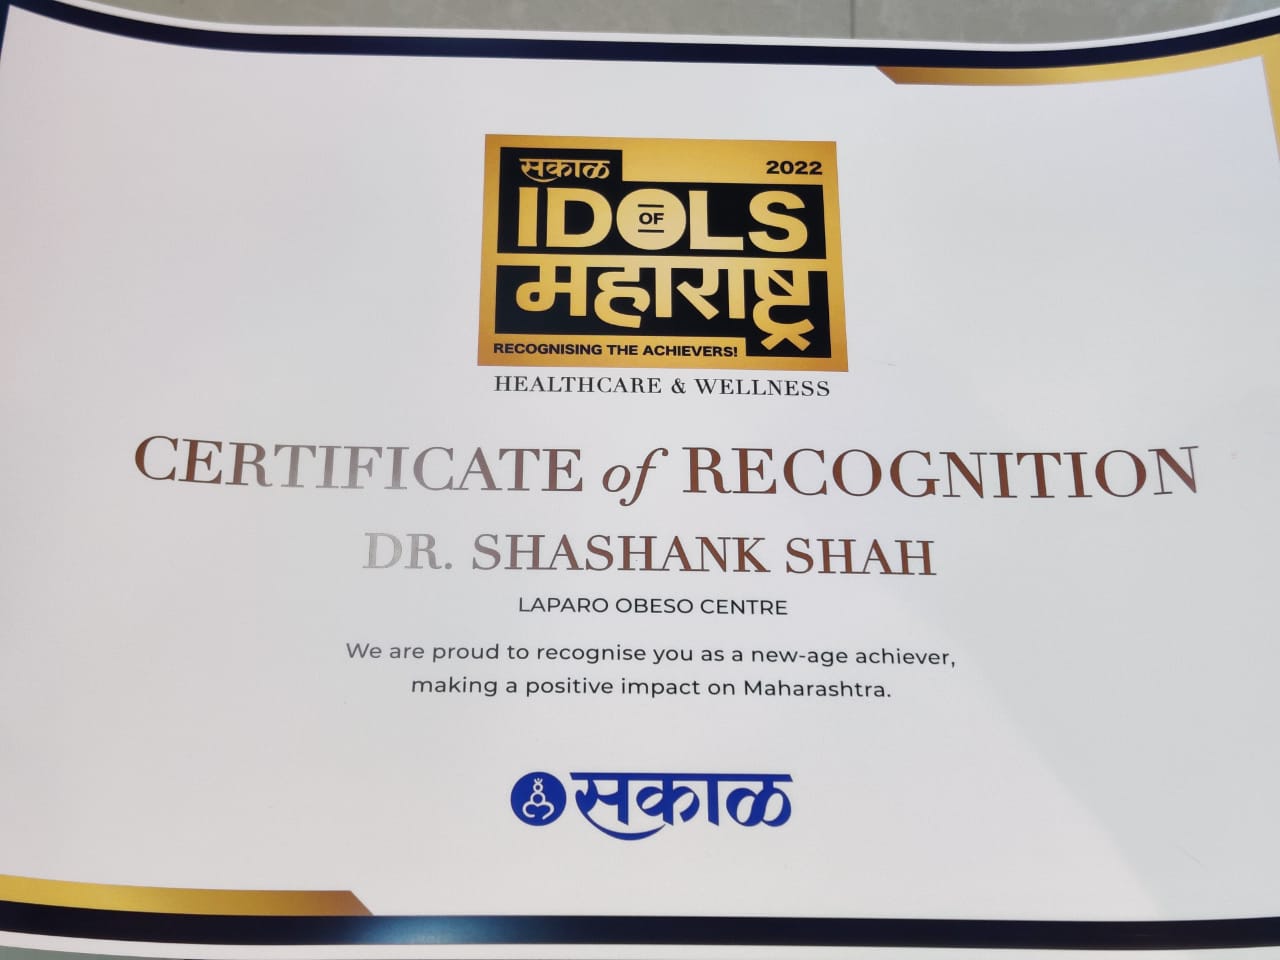 Dr Shashank Shah was felicitated with 'Certificate of Recognition' for his Outstanding Contribution to Healthcare and Wellness Industry by Sakal Media Group (Idols of Maharashtra Awards 2022)